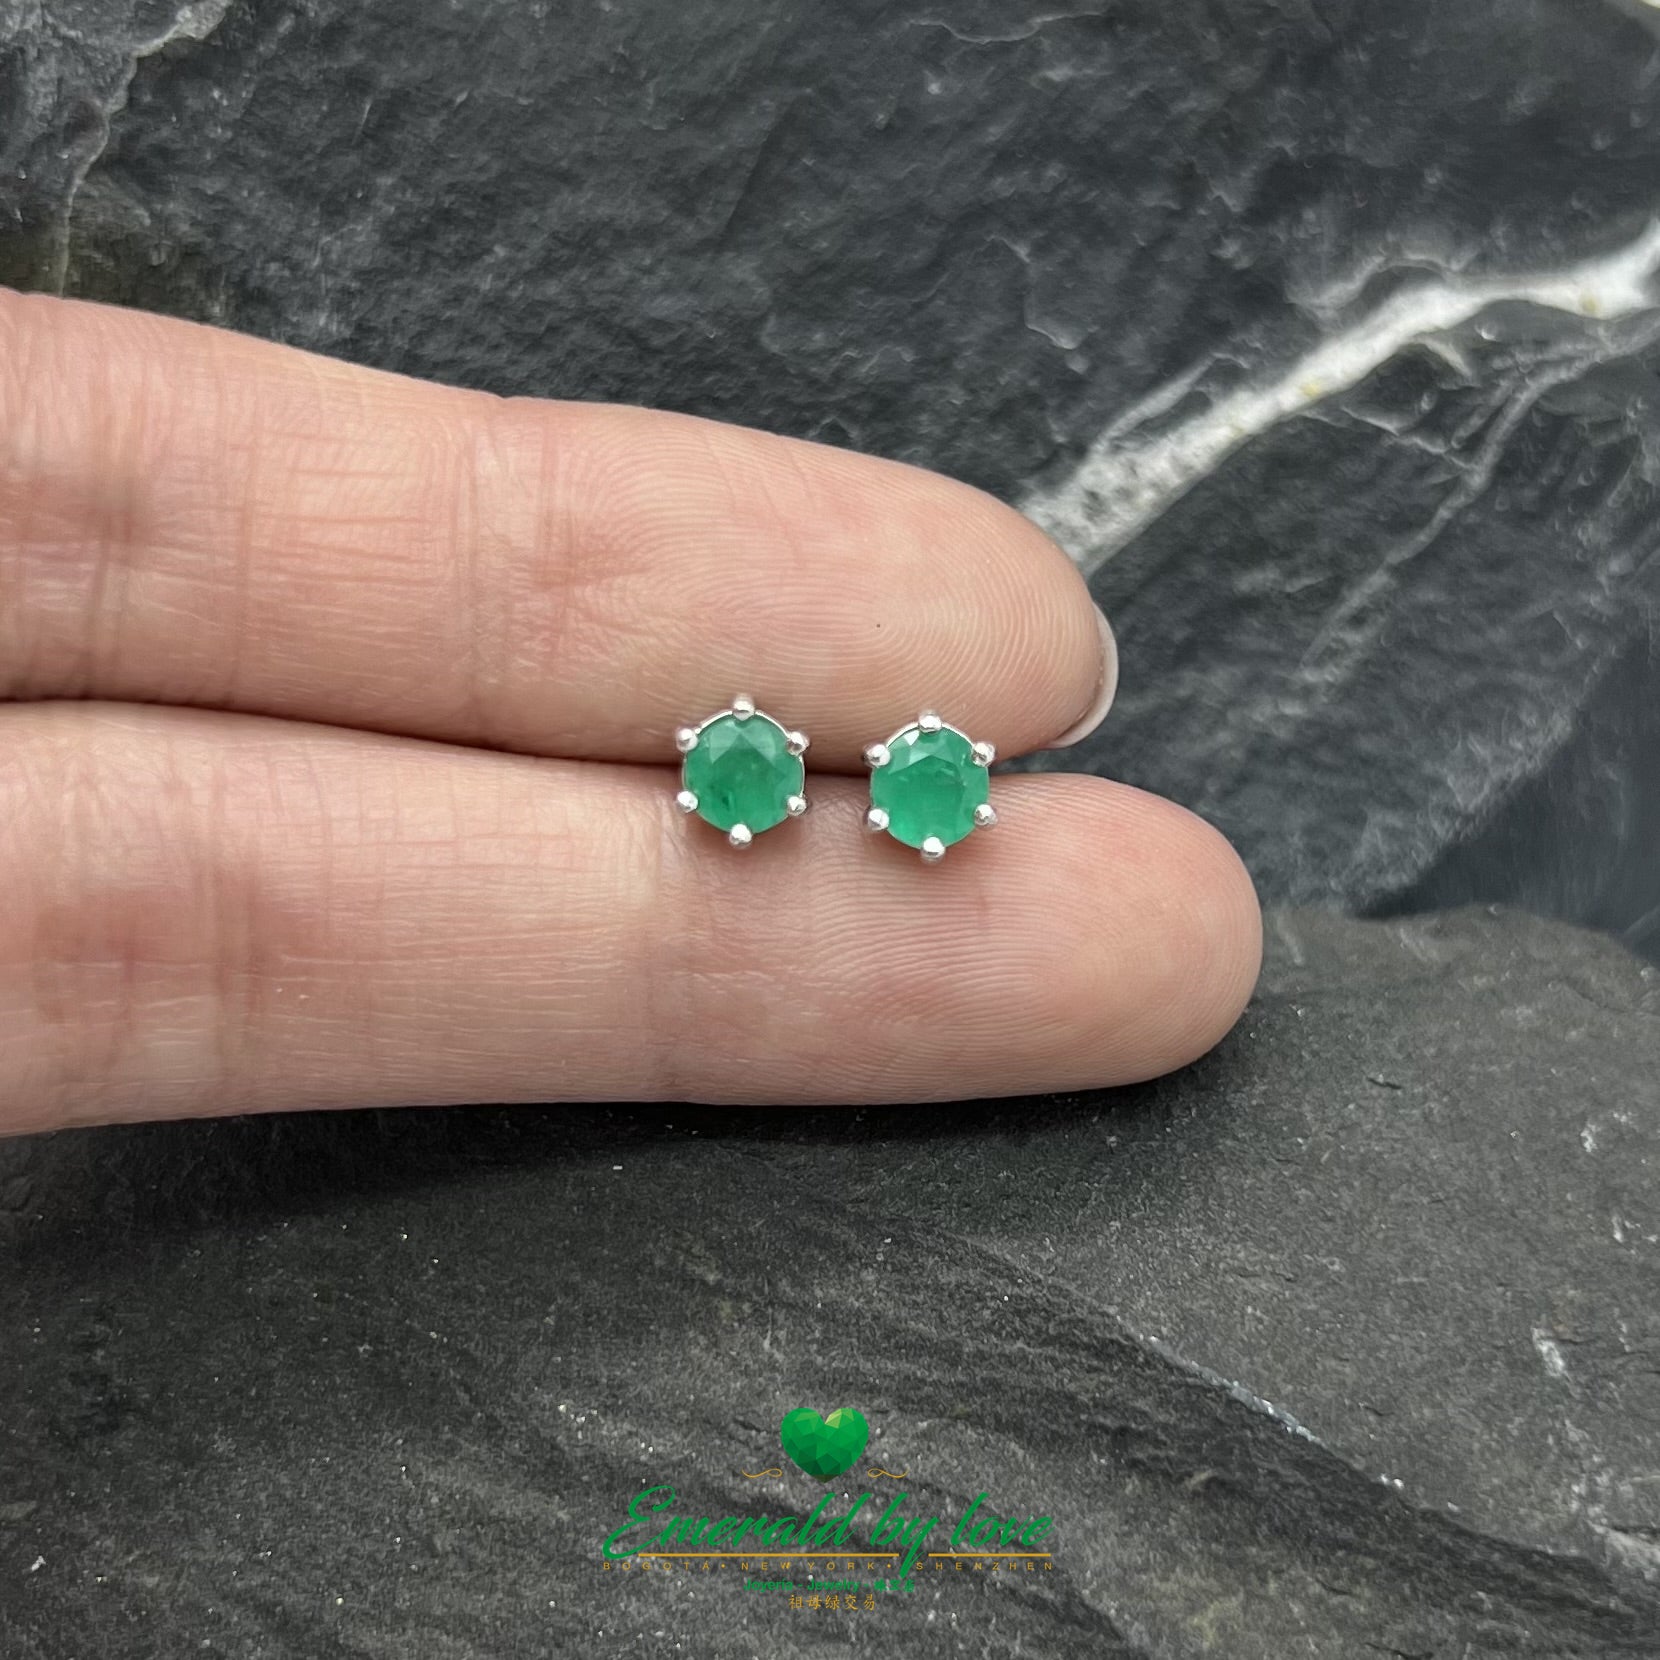 Simple Six-Prong Sterling Silver Stud Earrings with Round Central Emerald